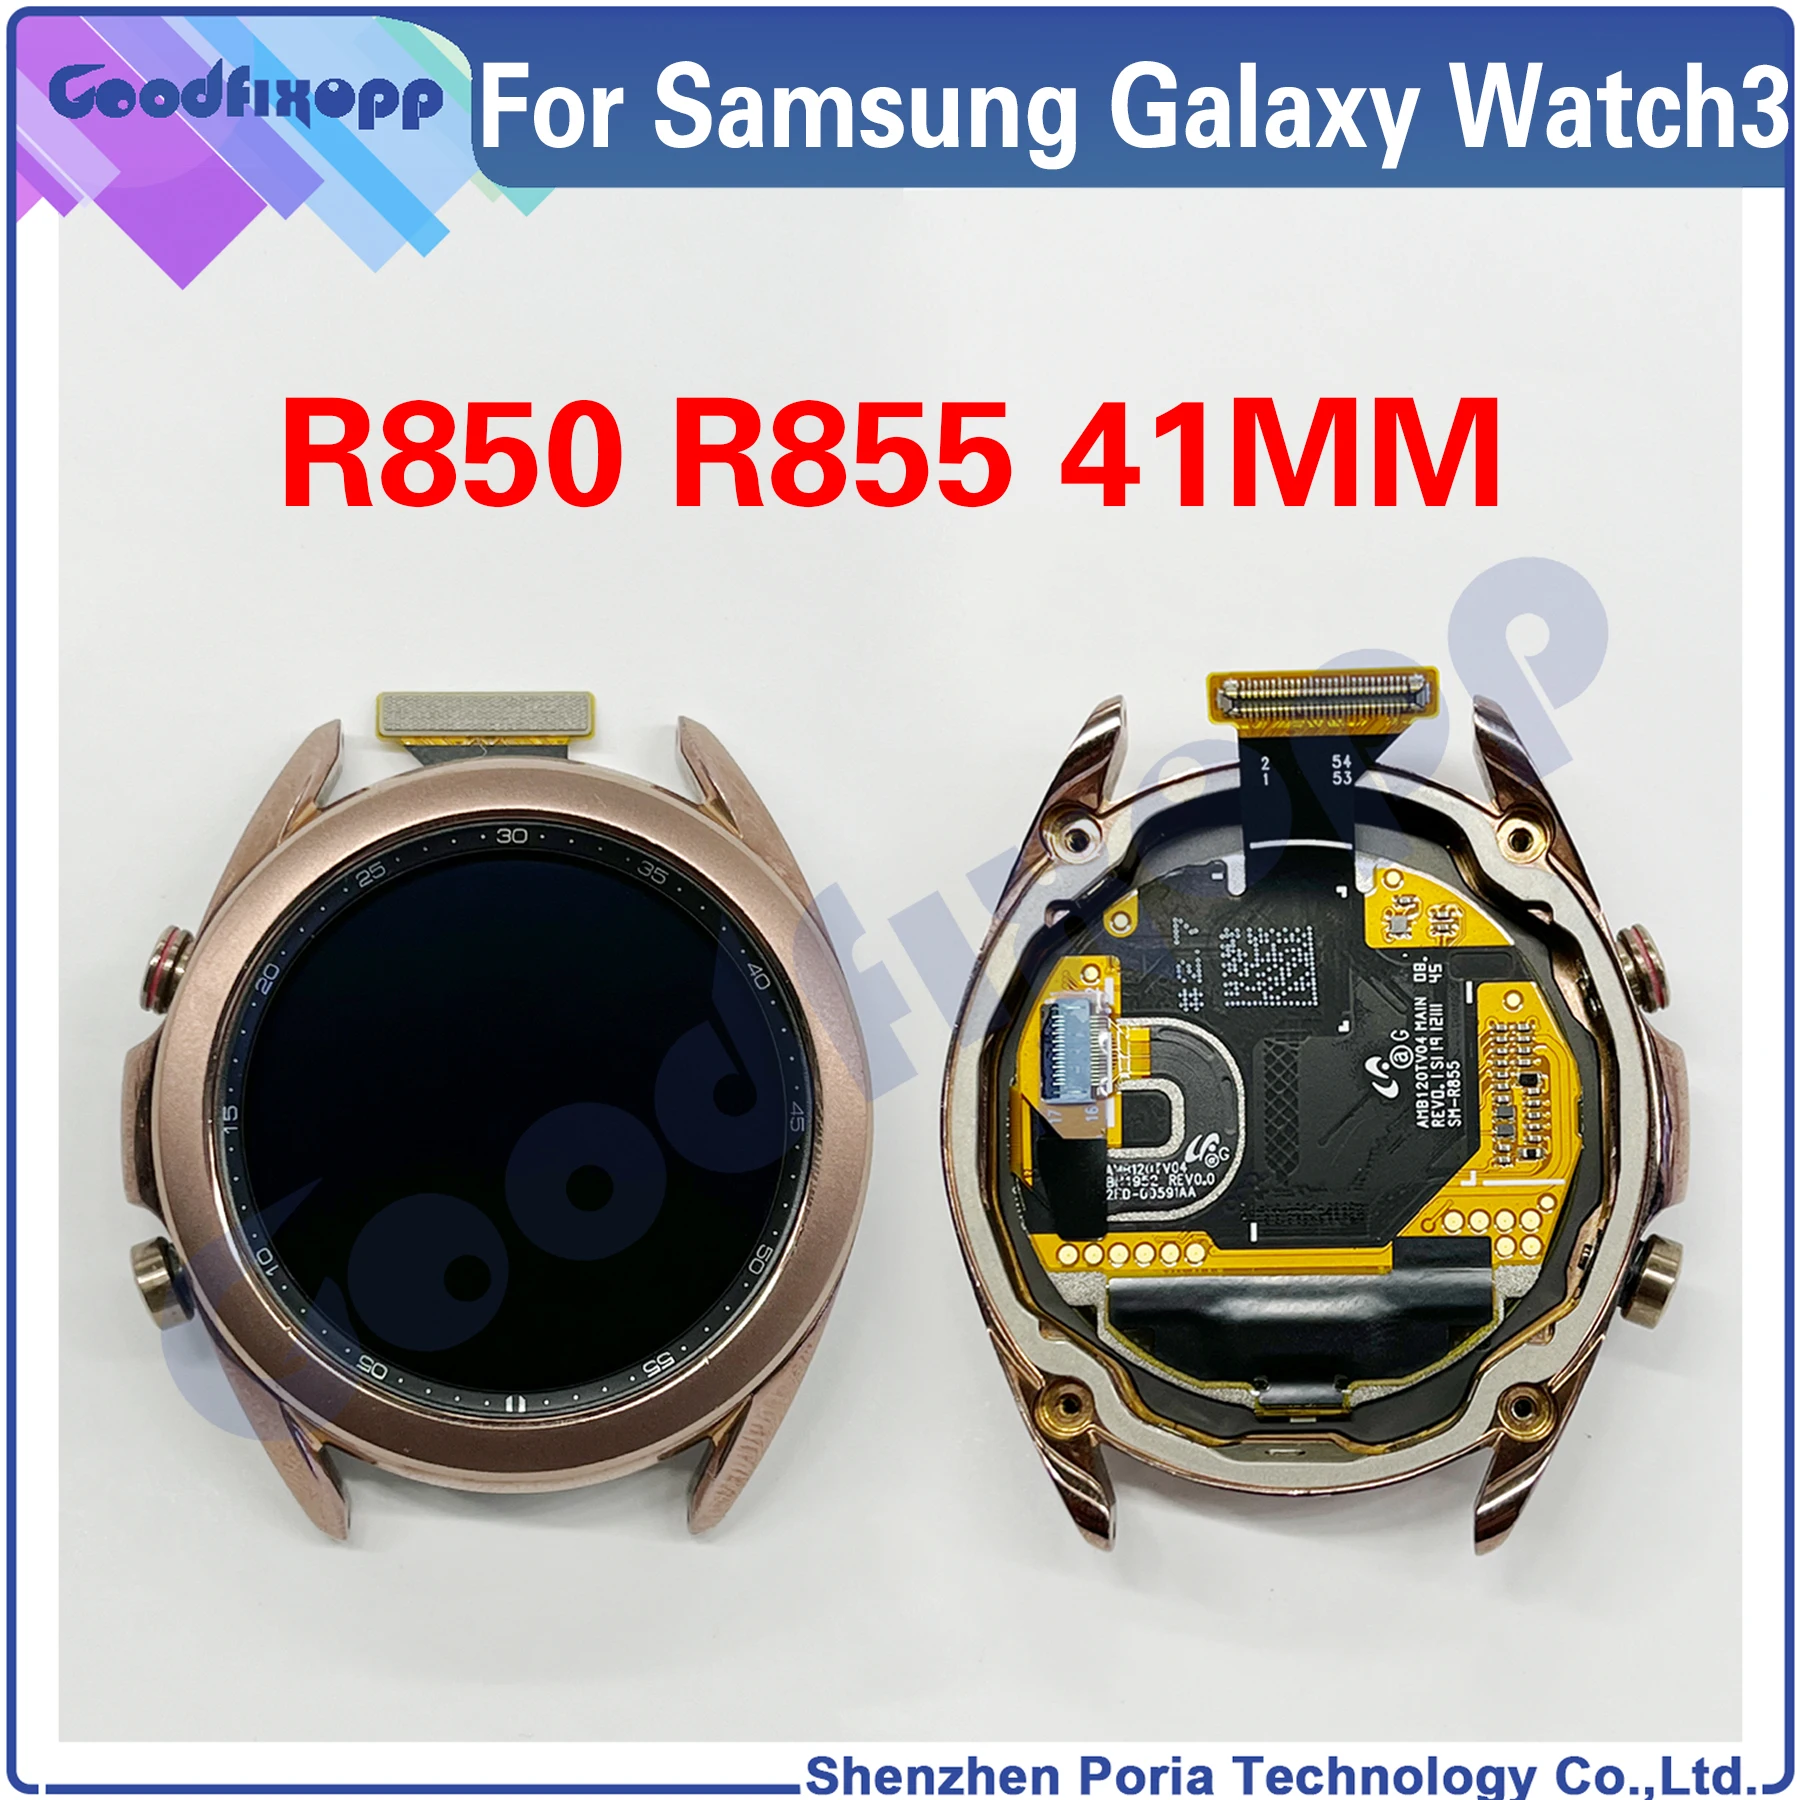 Original For Samsung Galaxy Watch3 R850 R855 41MM SM-R850 SM-R855 LCD Display Assembly Touch Screen